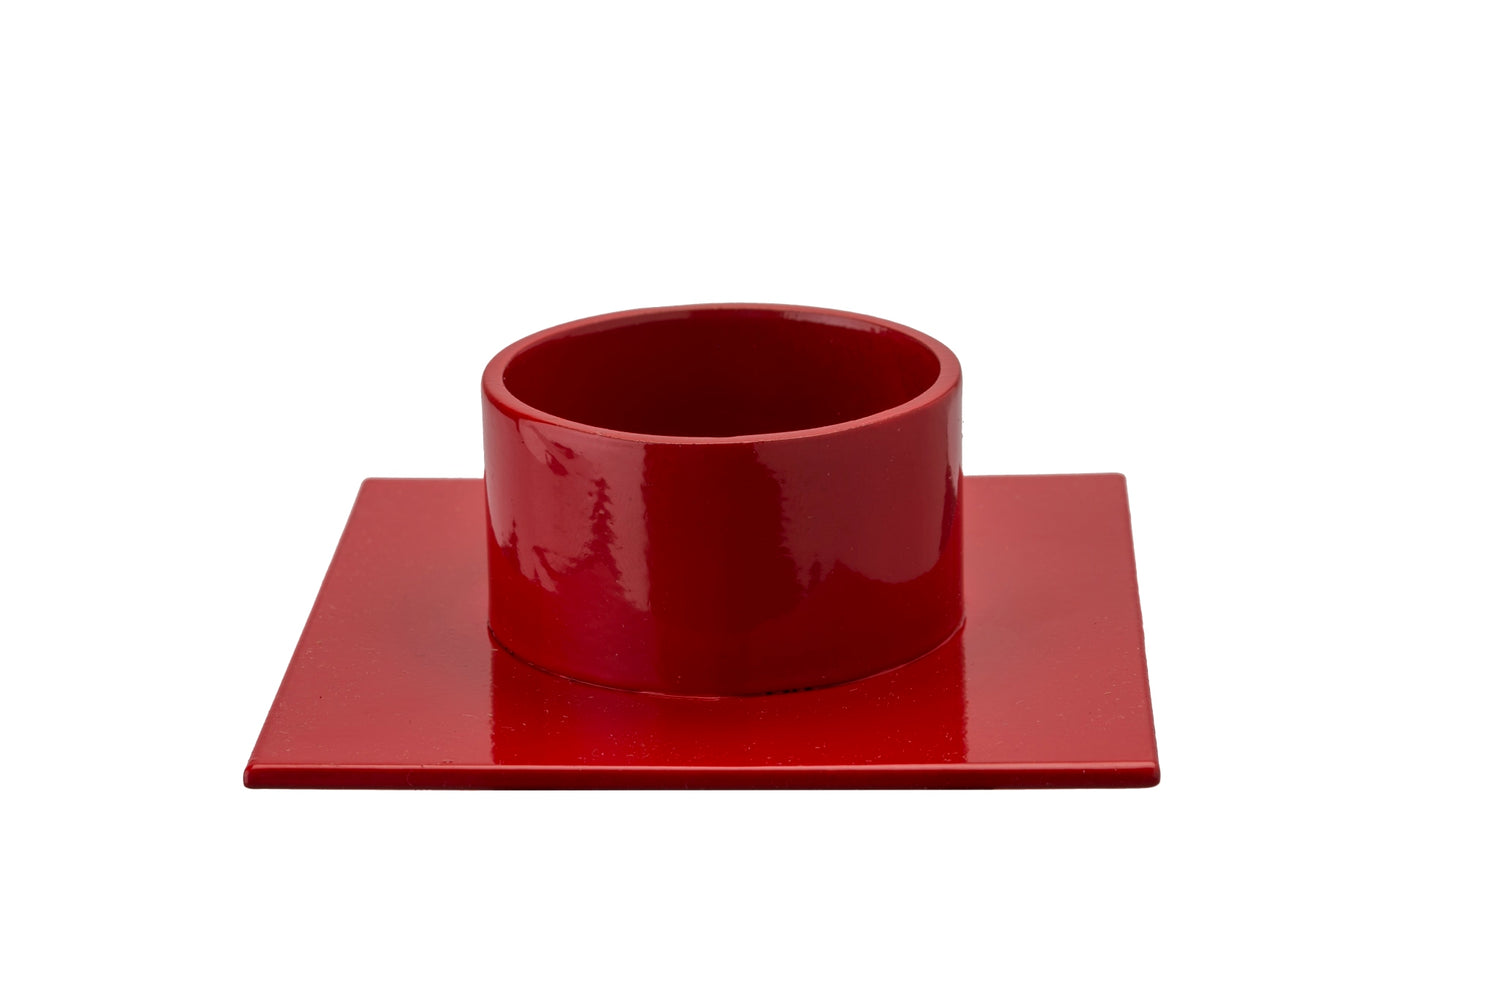 The Square (5 cm candle) - Red